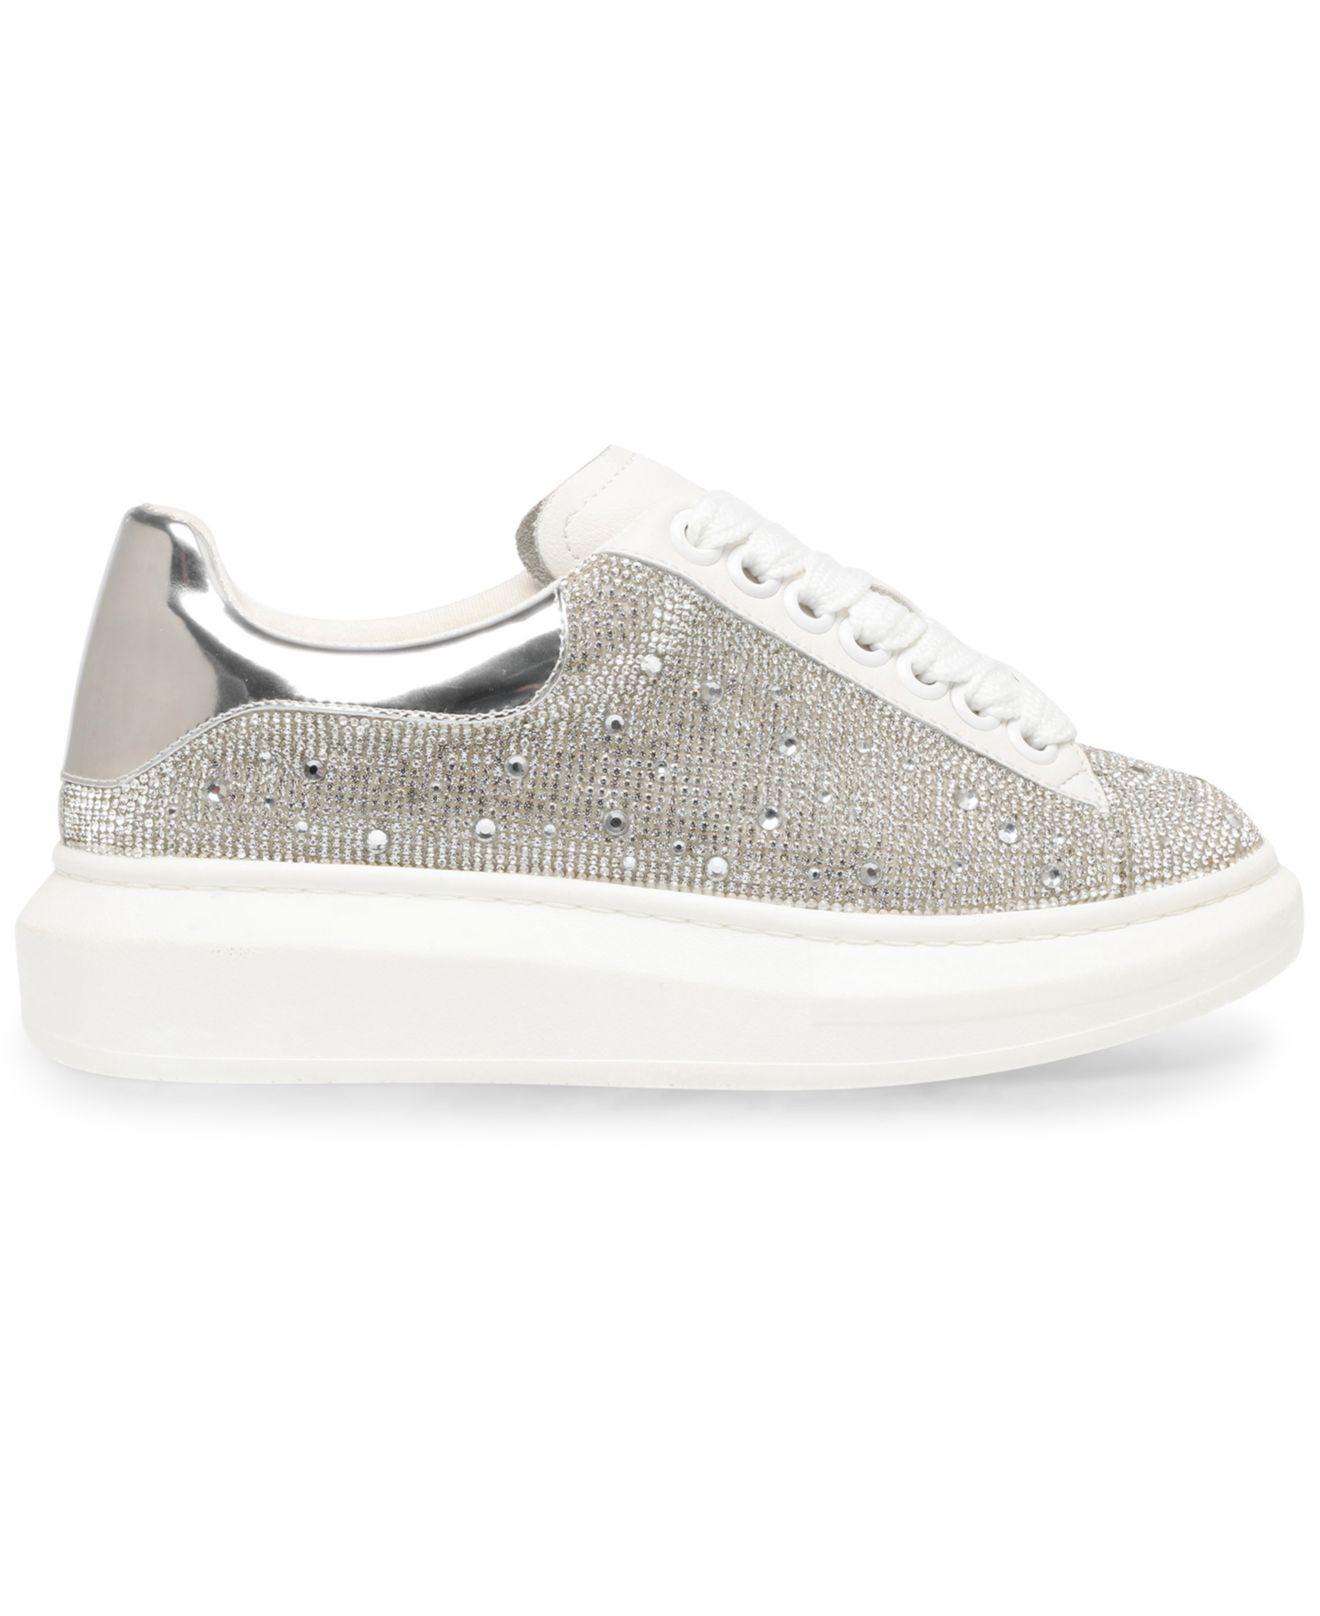 Steve Madden Glimmer-r Flatform Lace-up Sneakers in Crystal Rhinestone ...